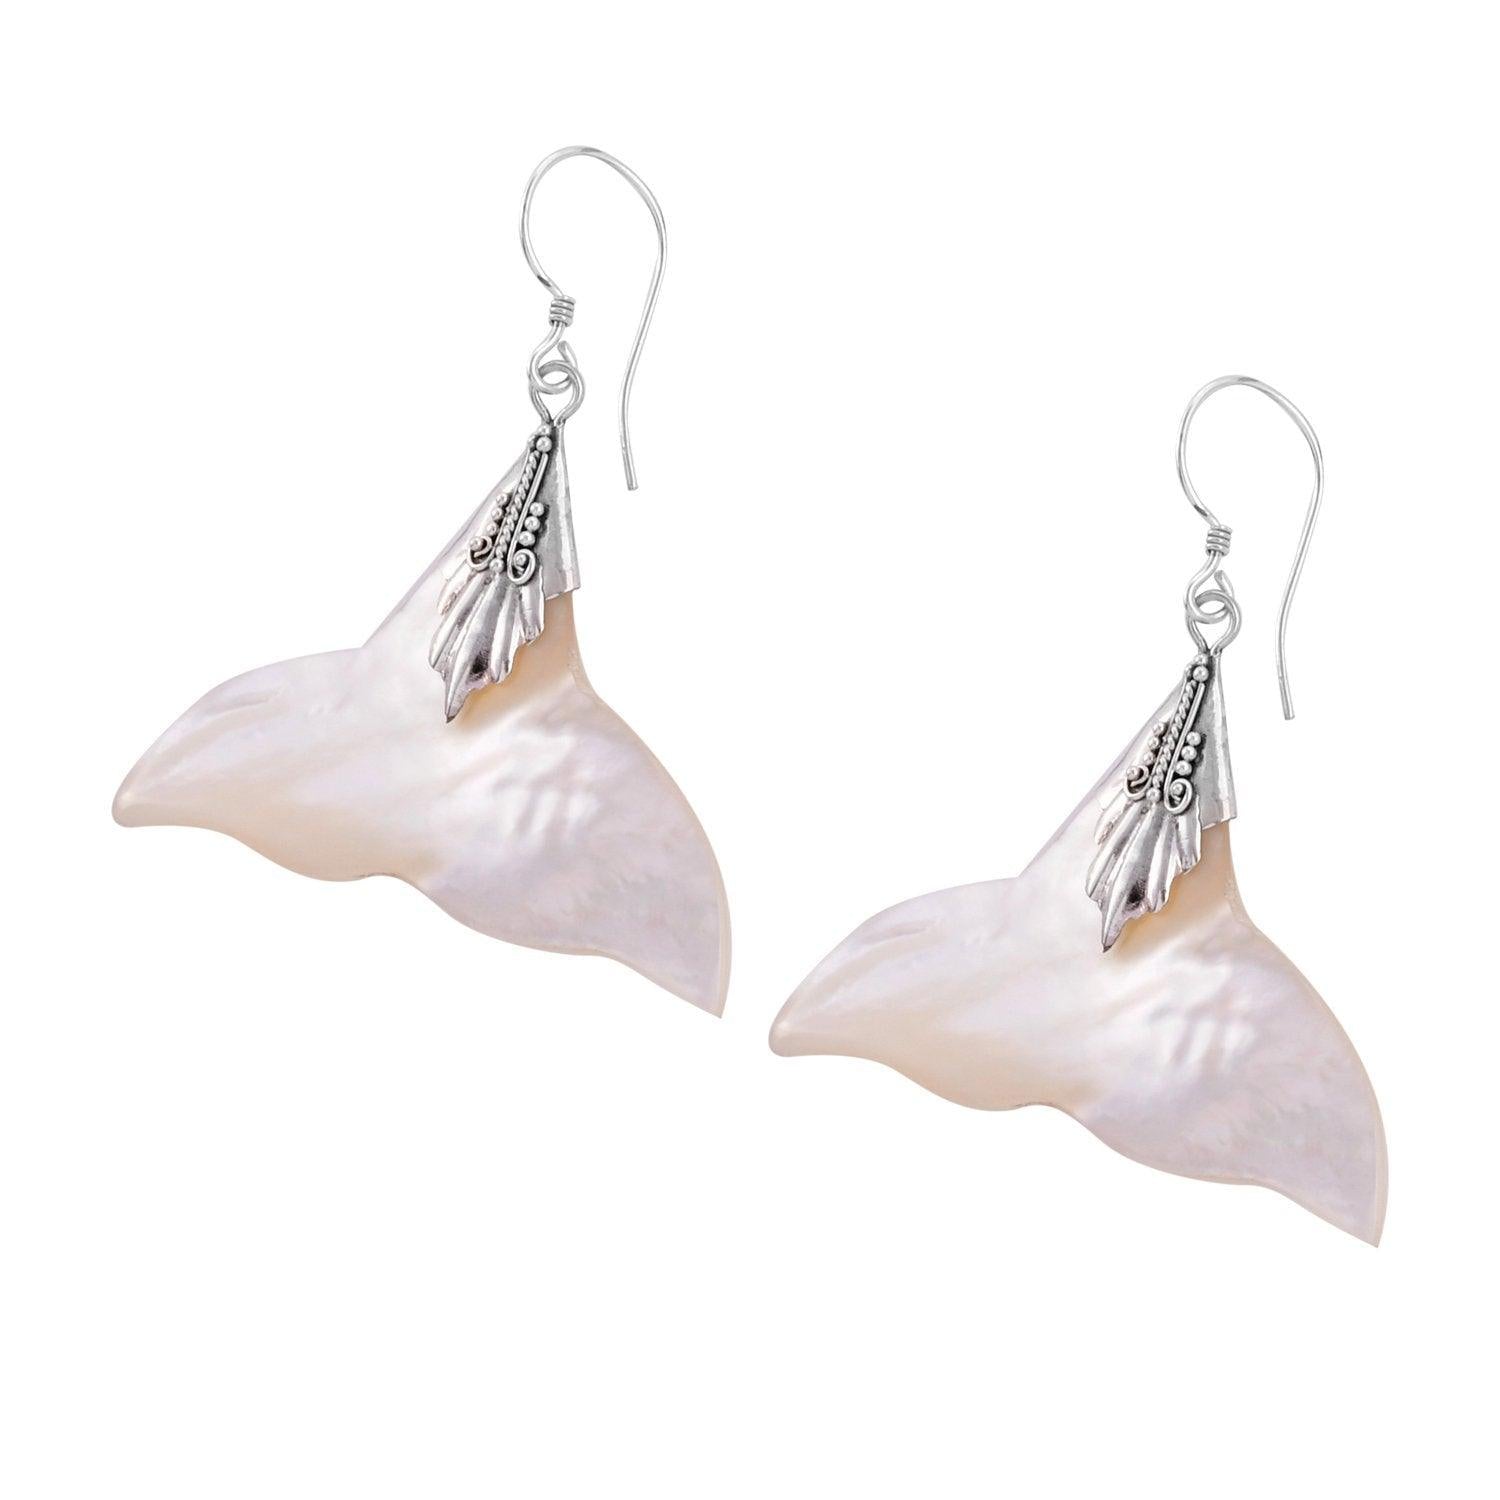 Handmade 925 Sterling Silver Whale Tail Mother Of Pearl Earrings Fishtail - Inspiring Jewellery